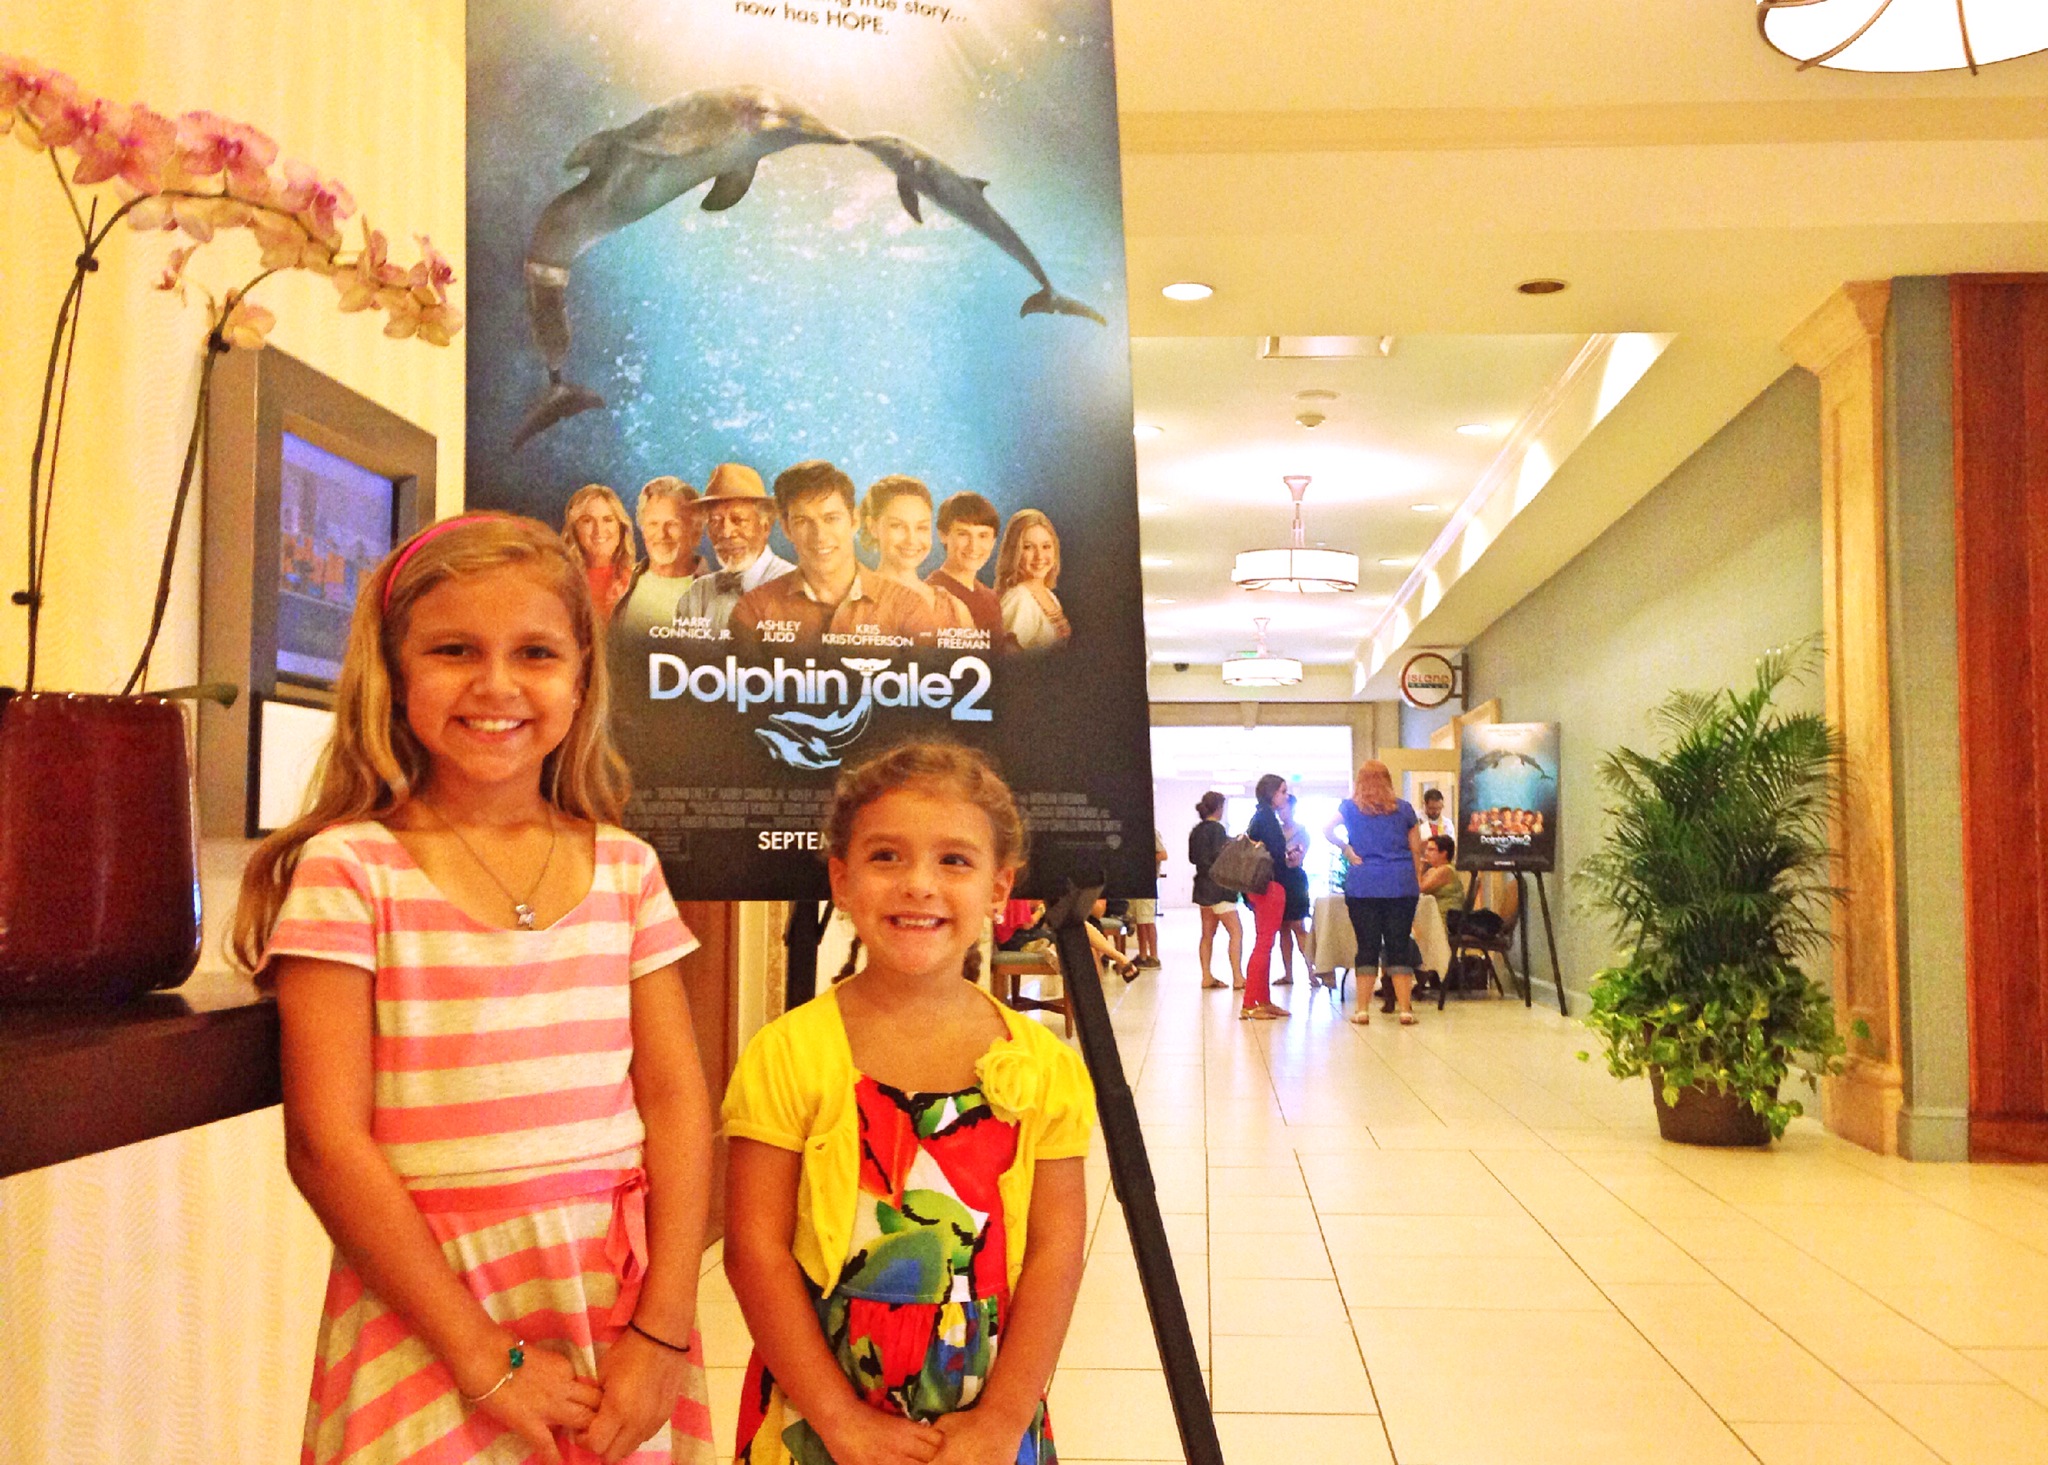 Winter has Hope: A Dolphin Tale 2 Movie Review